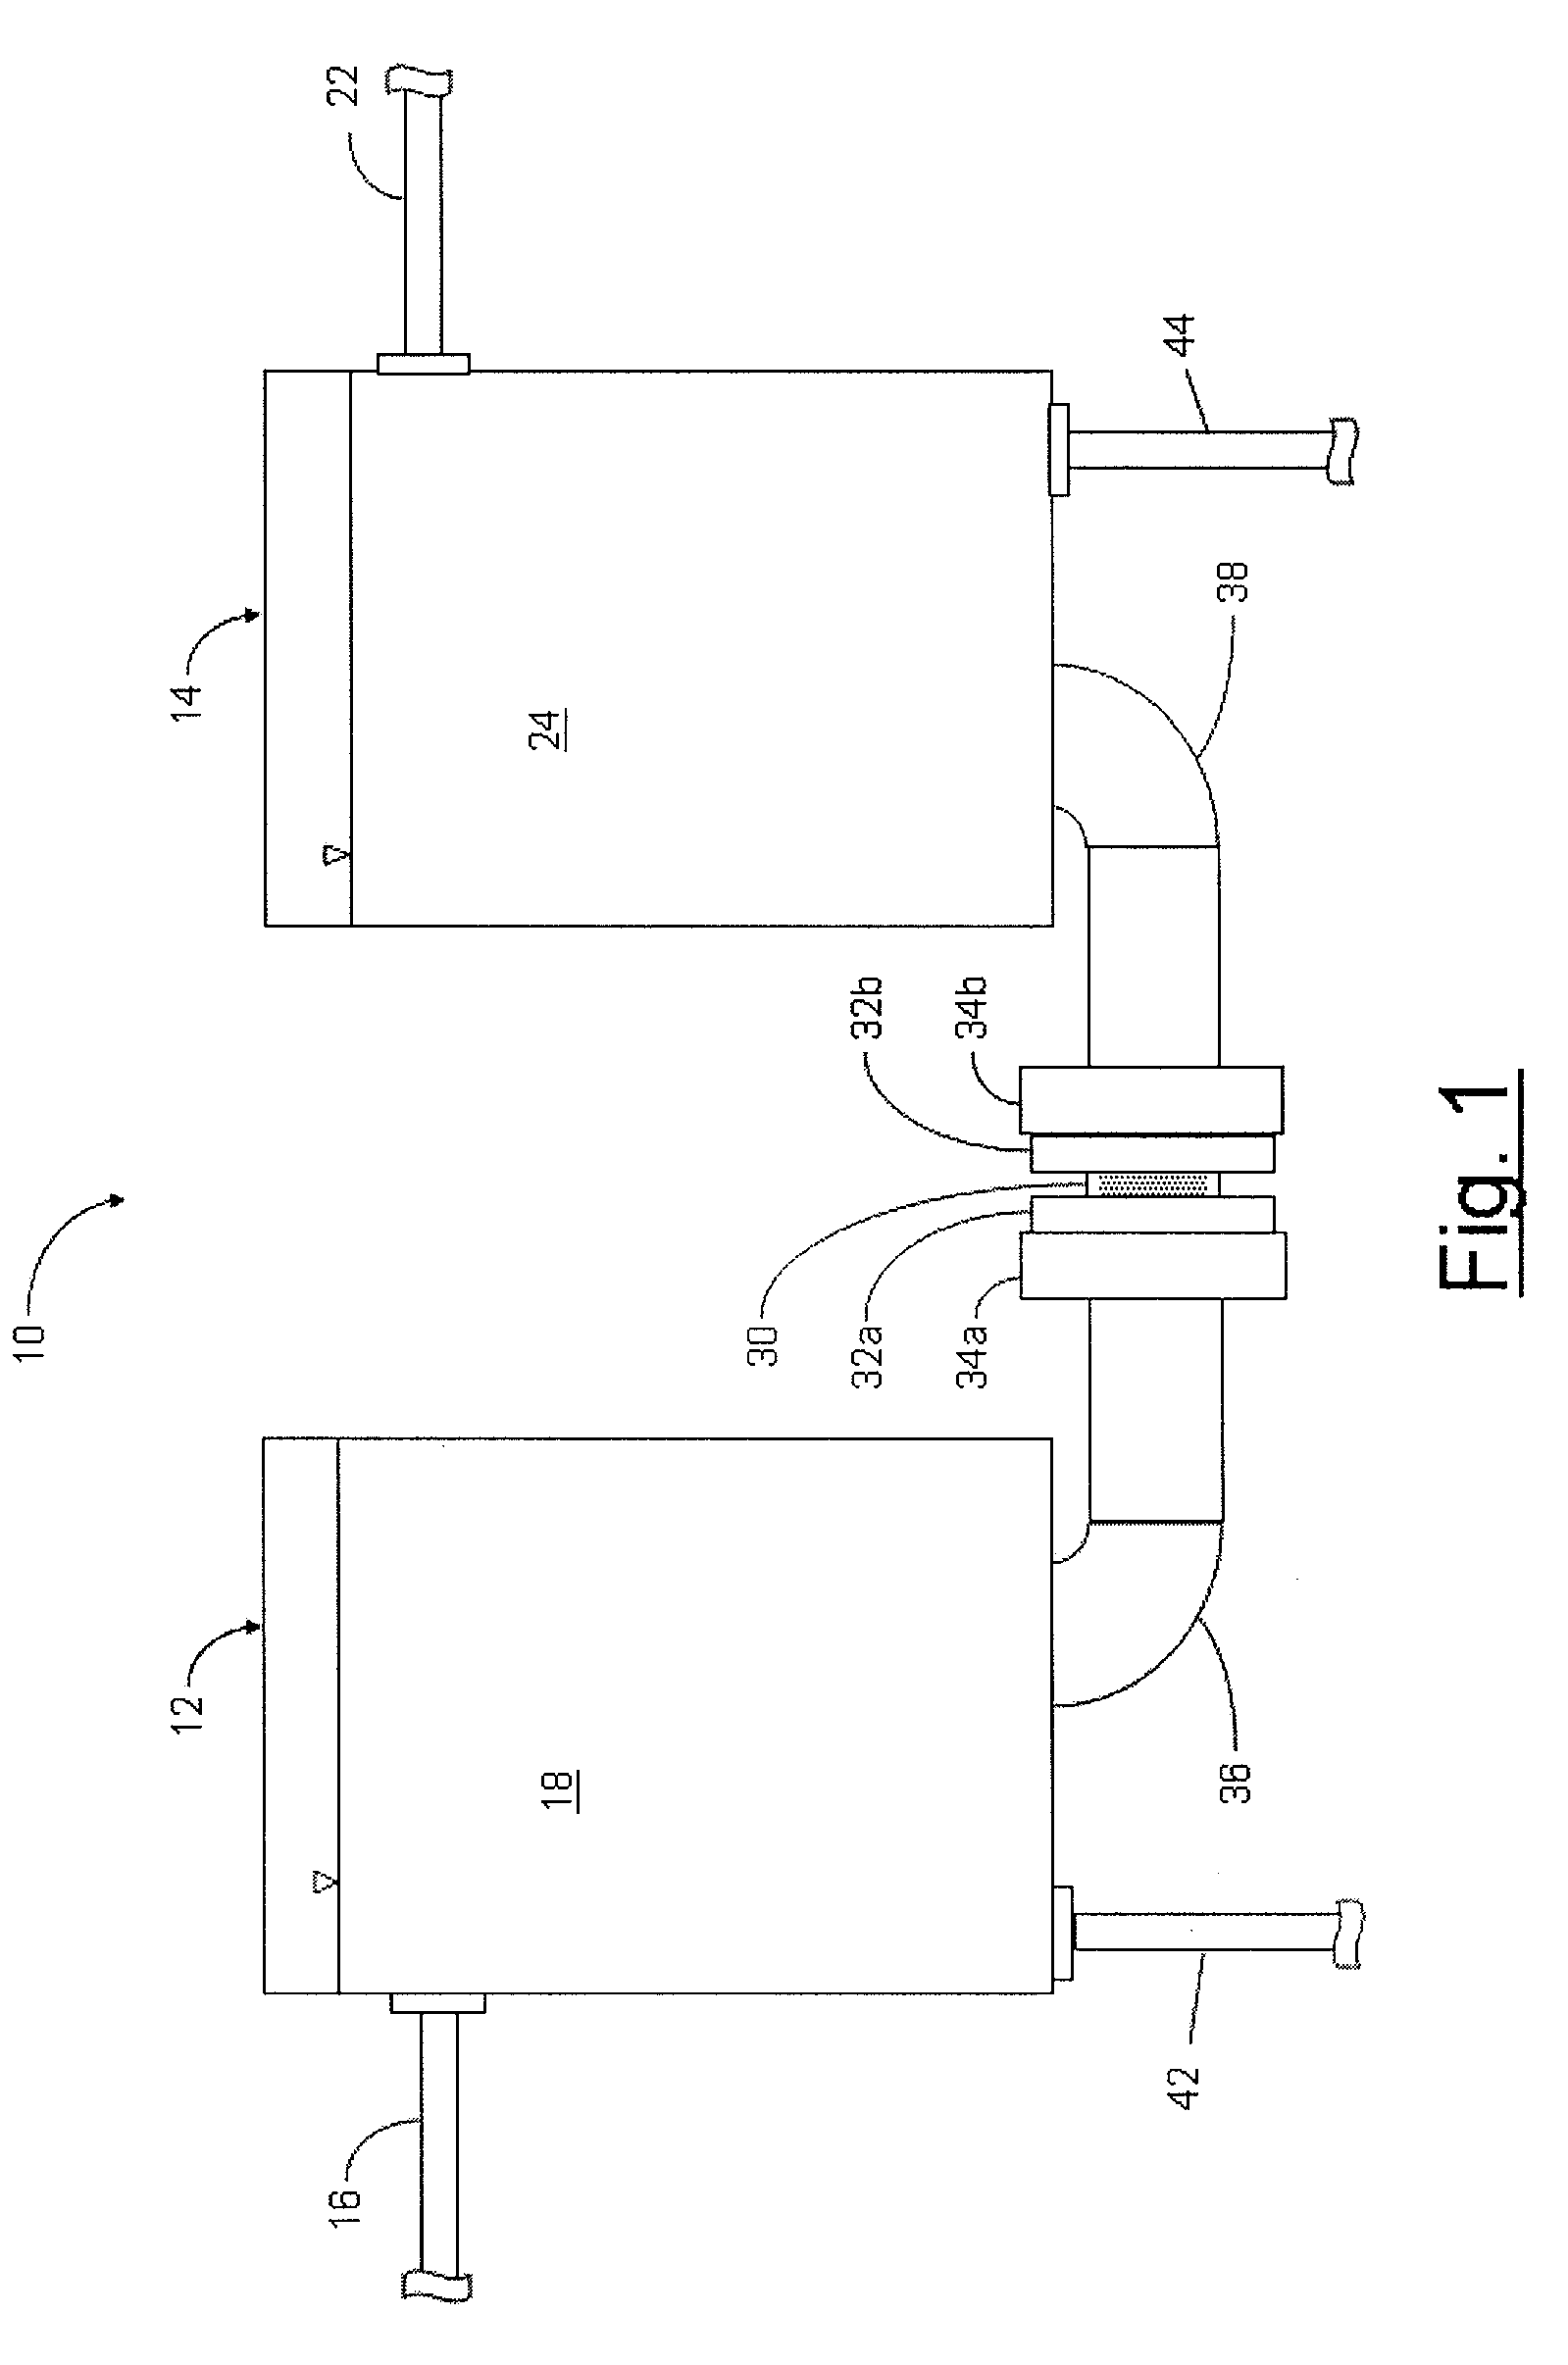 Systems and methods for forward osmosis fluid purification using cloud point extraction